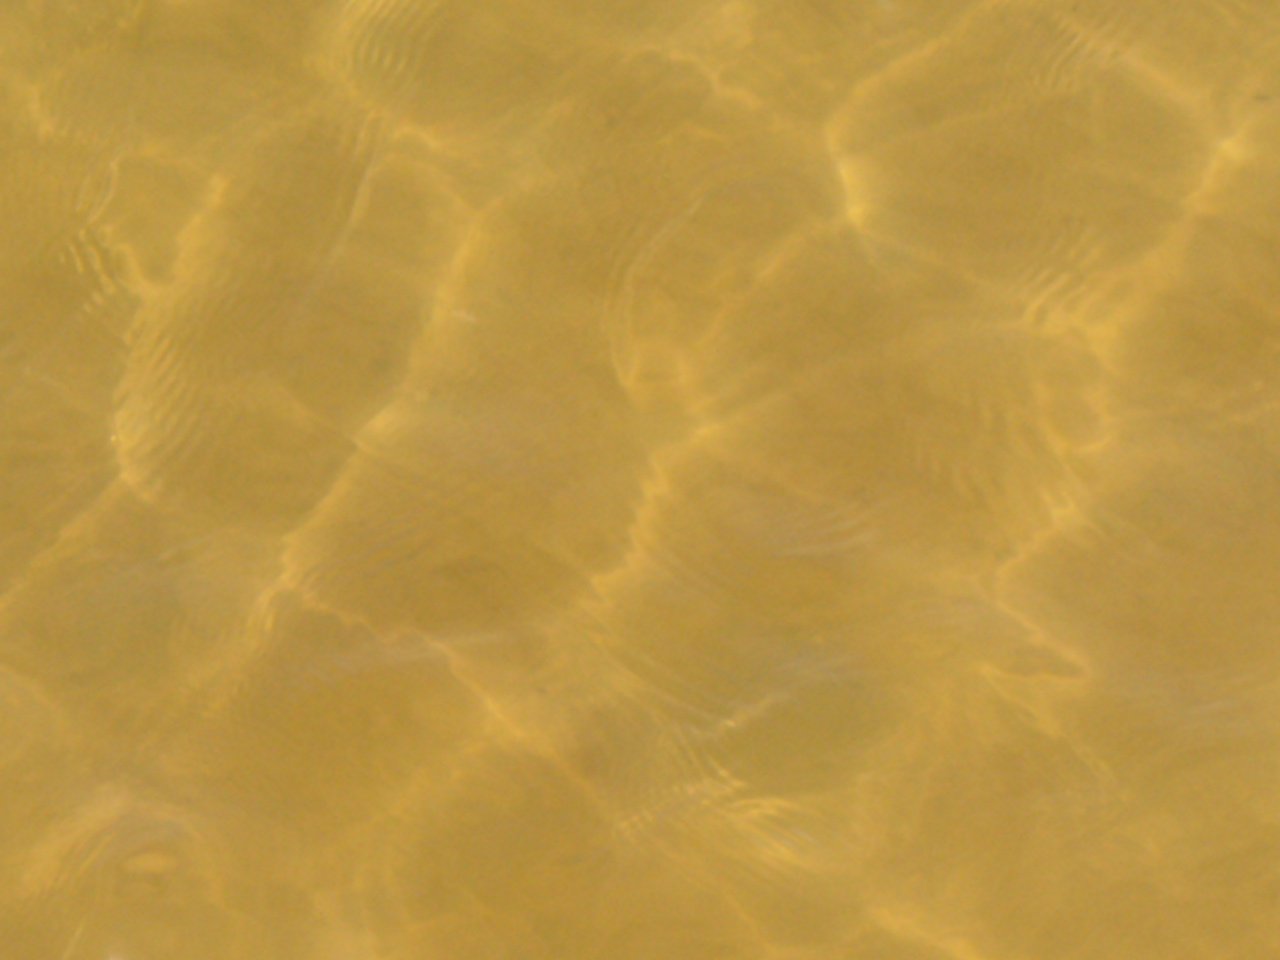 a close up view of the water from under the beach